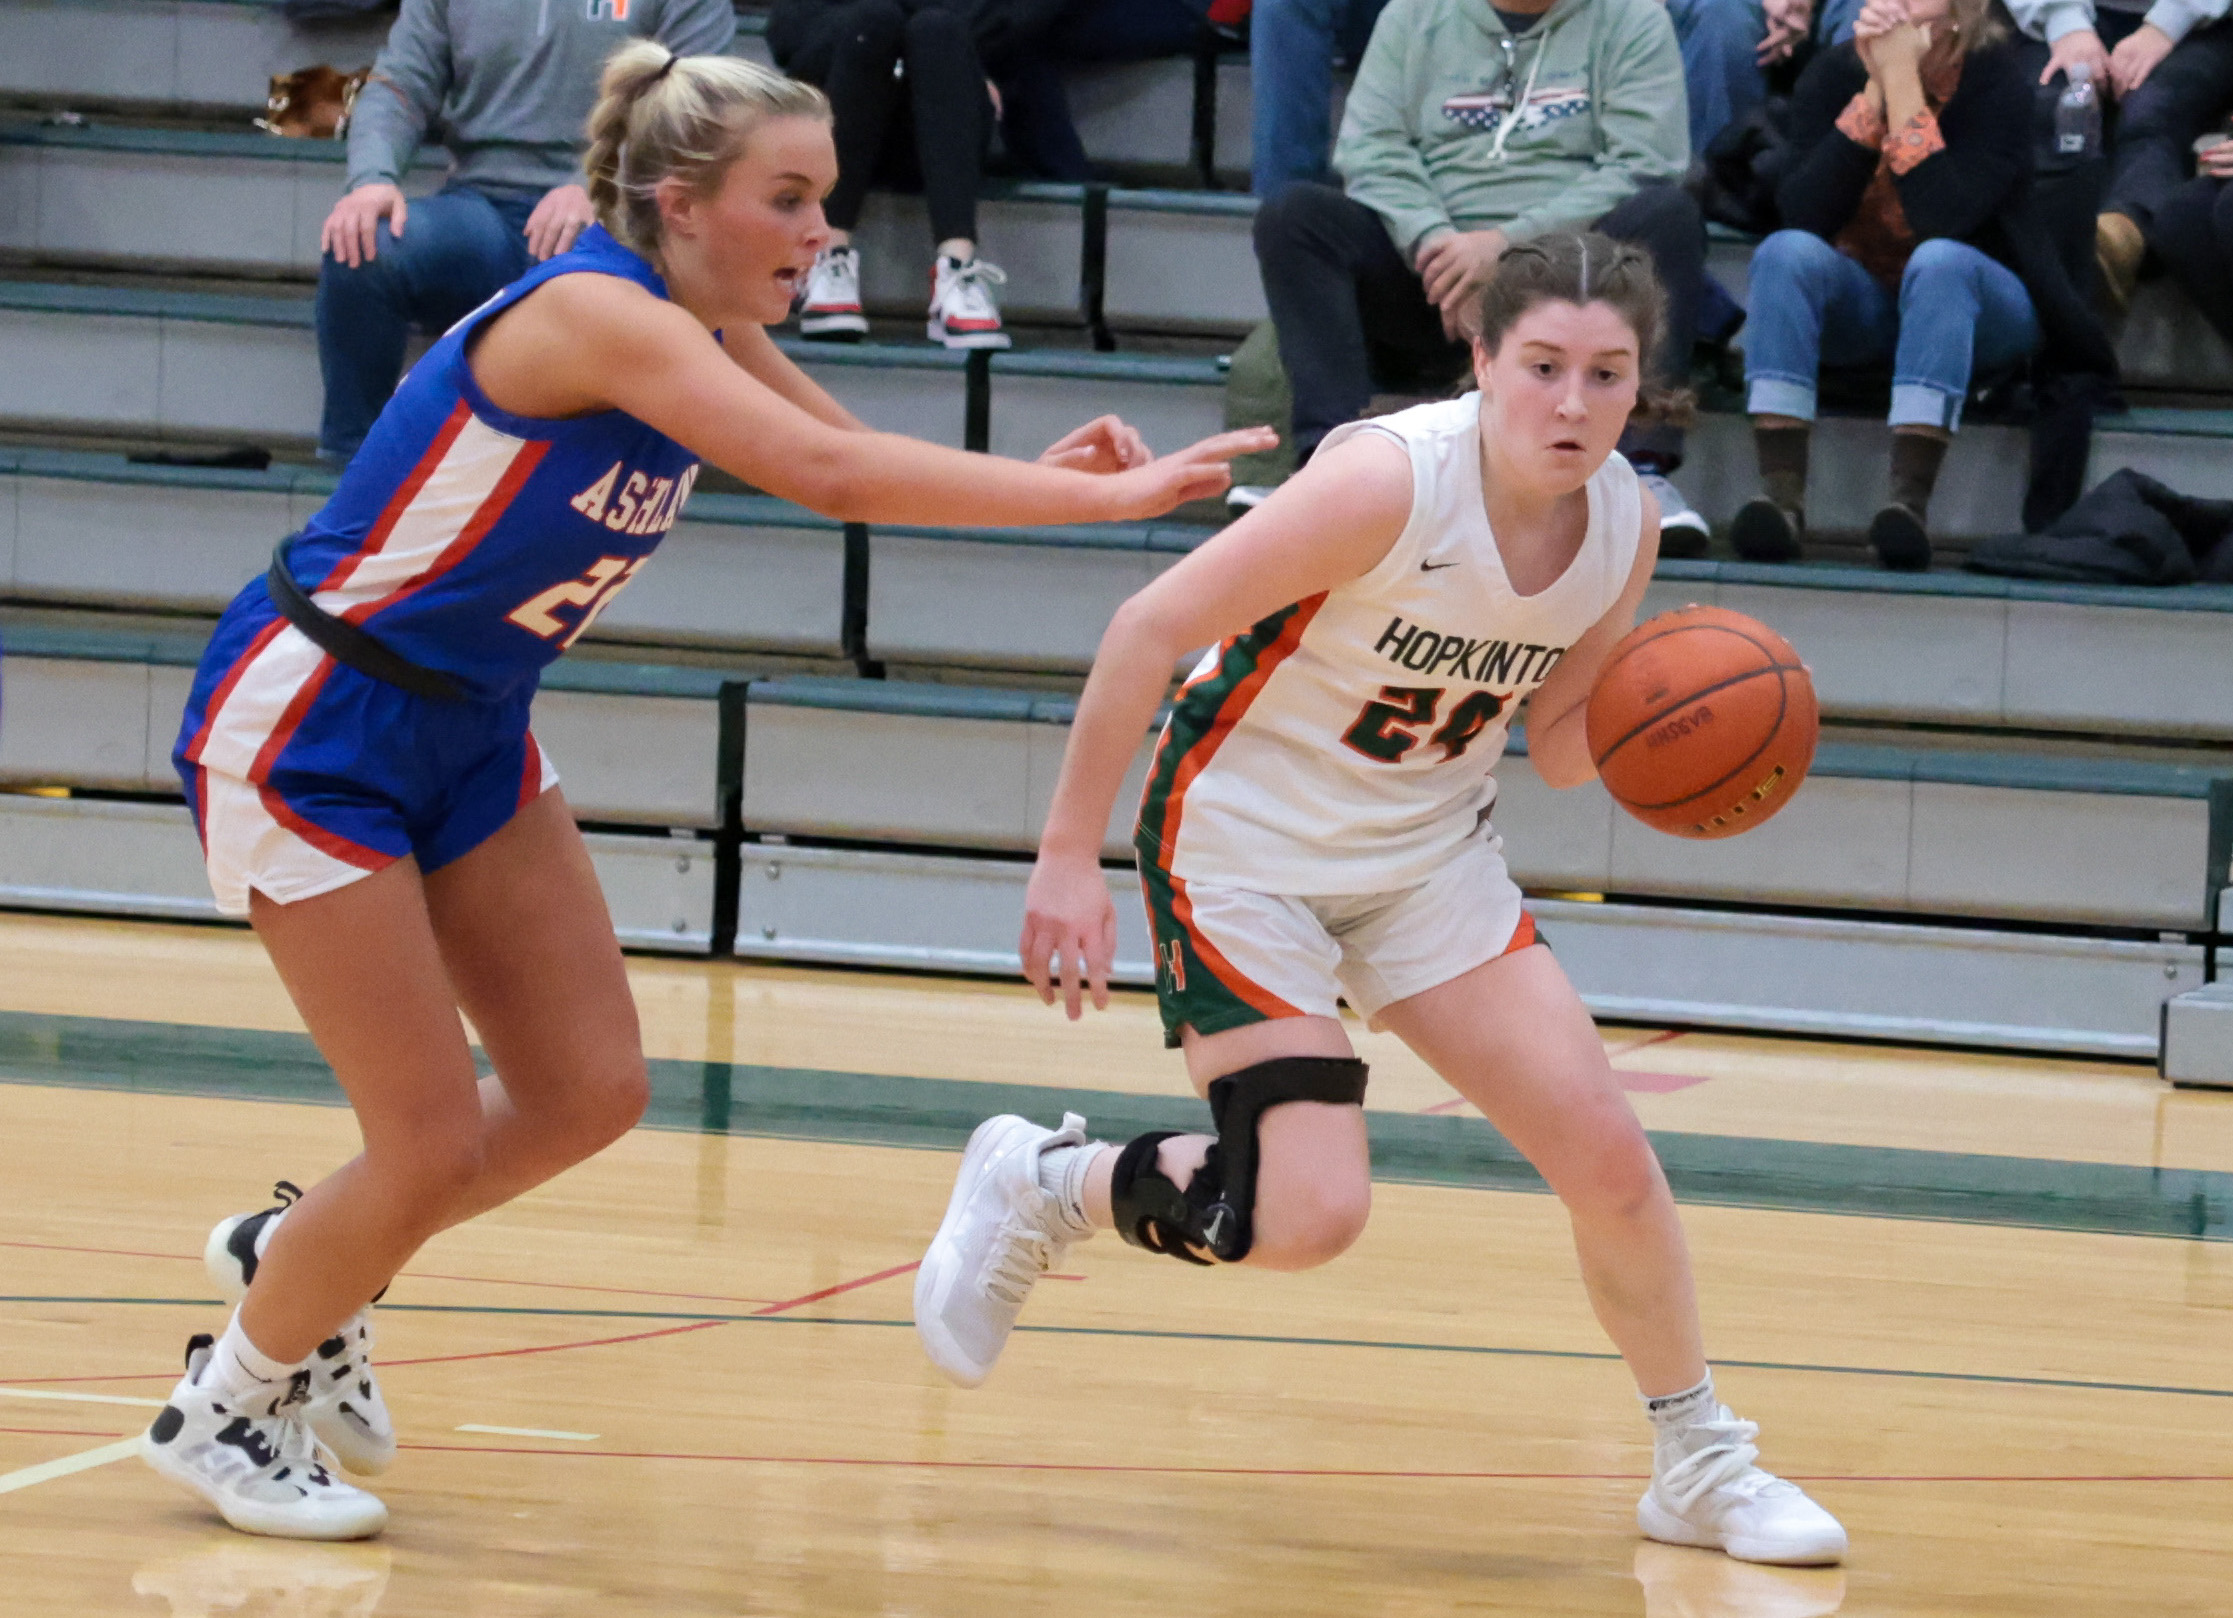 Hillers girls hoops brings experience to court this season